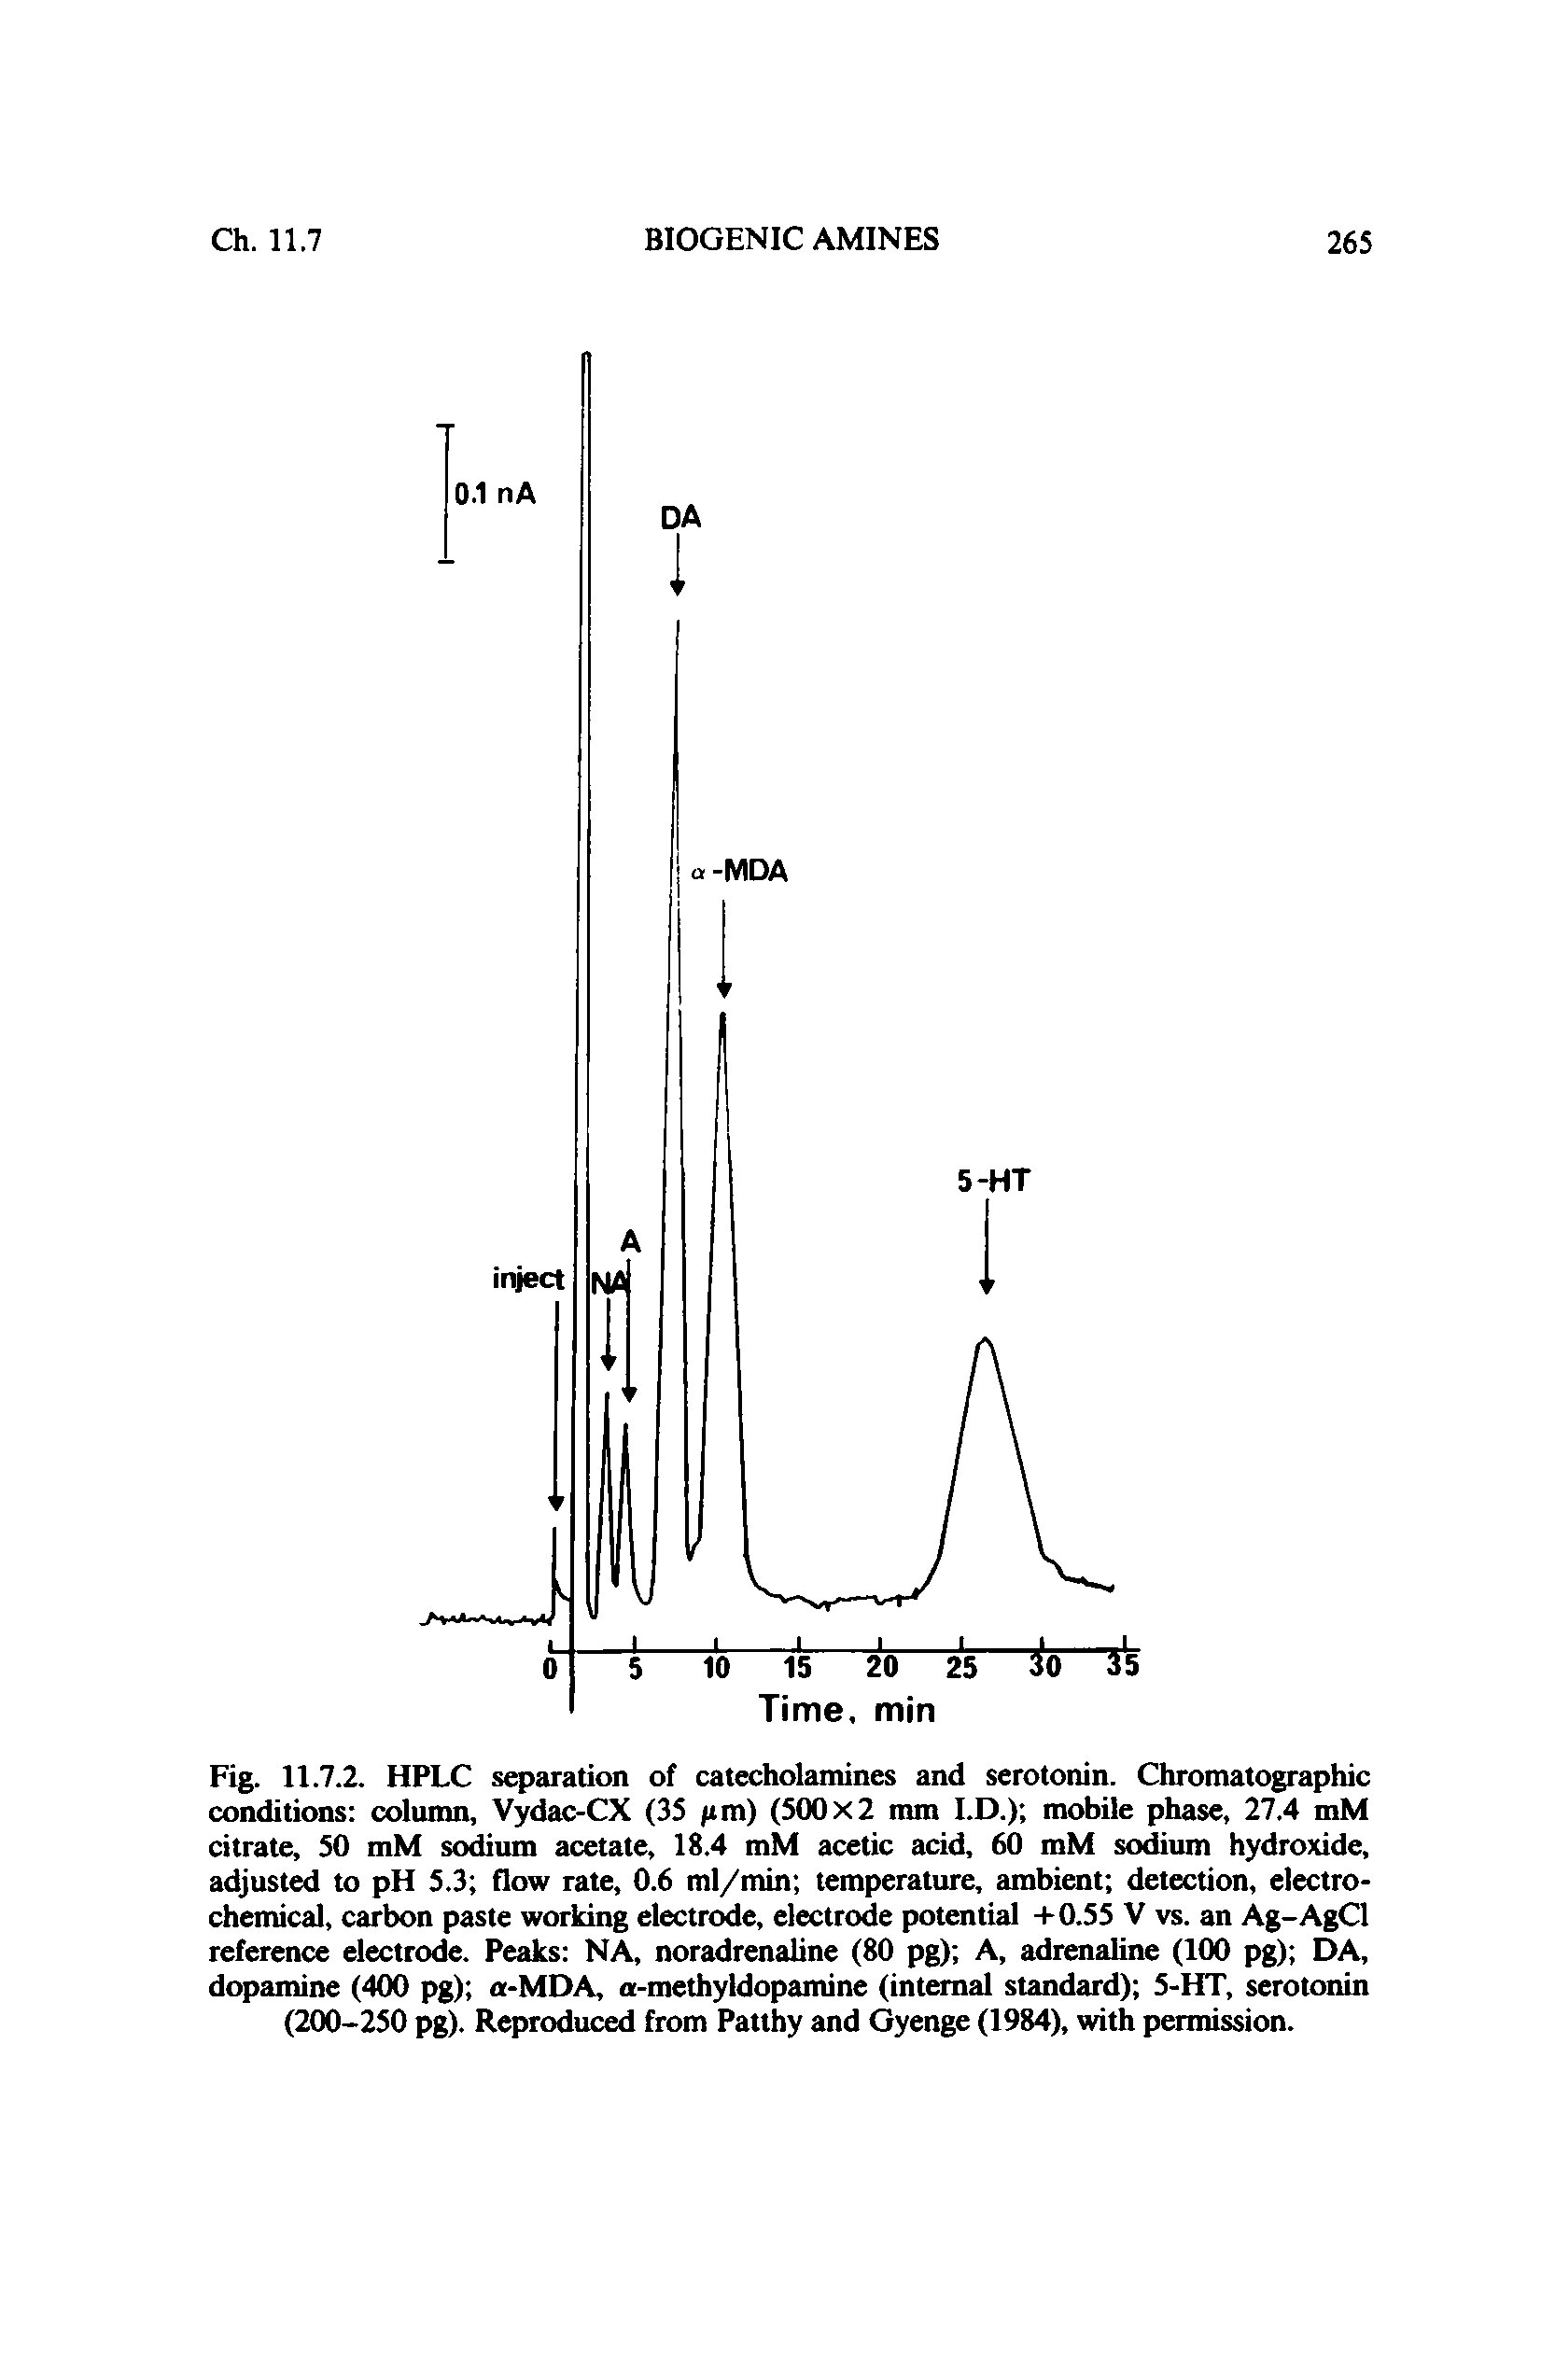 Fig. 11.7.2. HPLC separation of catecholamines and serotonin. Chromatographic conditions column, Vydac-CX (35 fim) (500 x 2 mm I.D.) mobile phase, 27.4 mM citrate, 50 mM sodium acetate, 18.4 mM acetic acid, 60 mM so um hydroxide, adjusted to pH 5.3 flow rate, 0.6 ml/min temperature, ambient detection, electrochemical, carbon paste working electrode, electrode potential -1-0.55 V vs. an Ag-AgCl reference electrode. Peaks NA, noradrenaline (80 pg) A, adrenaline (100 pg) DA, dopamine (4(X) pg) a-MDA, a-methyidopamine (internal standard) 5-HT, serotonin (200-250 pg). Reproduced from Patthy and Oyenge (1984), with permission.